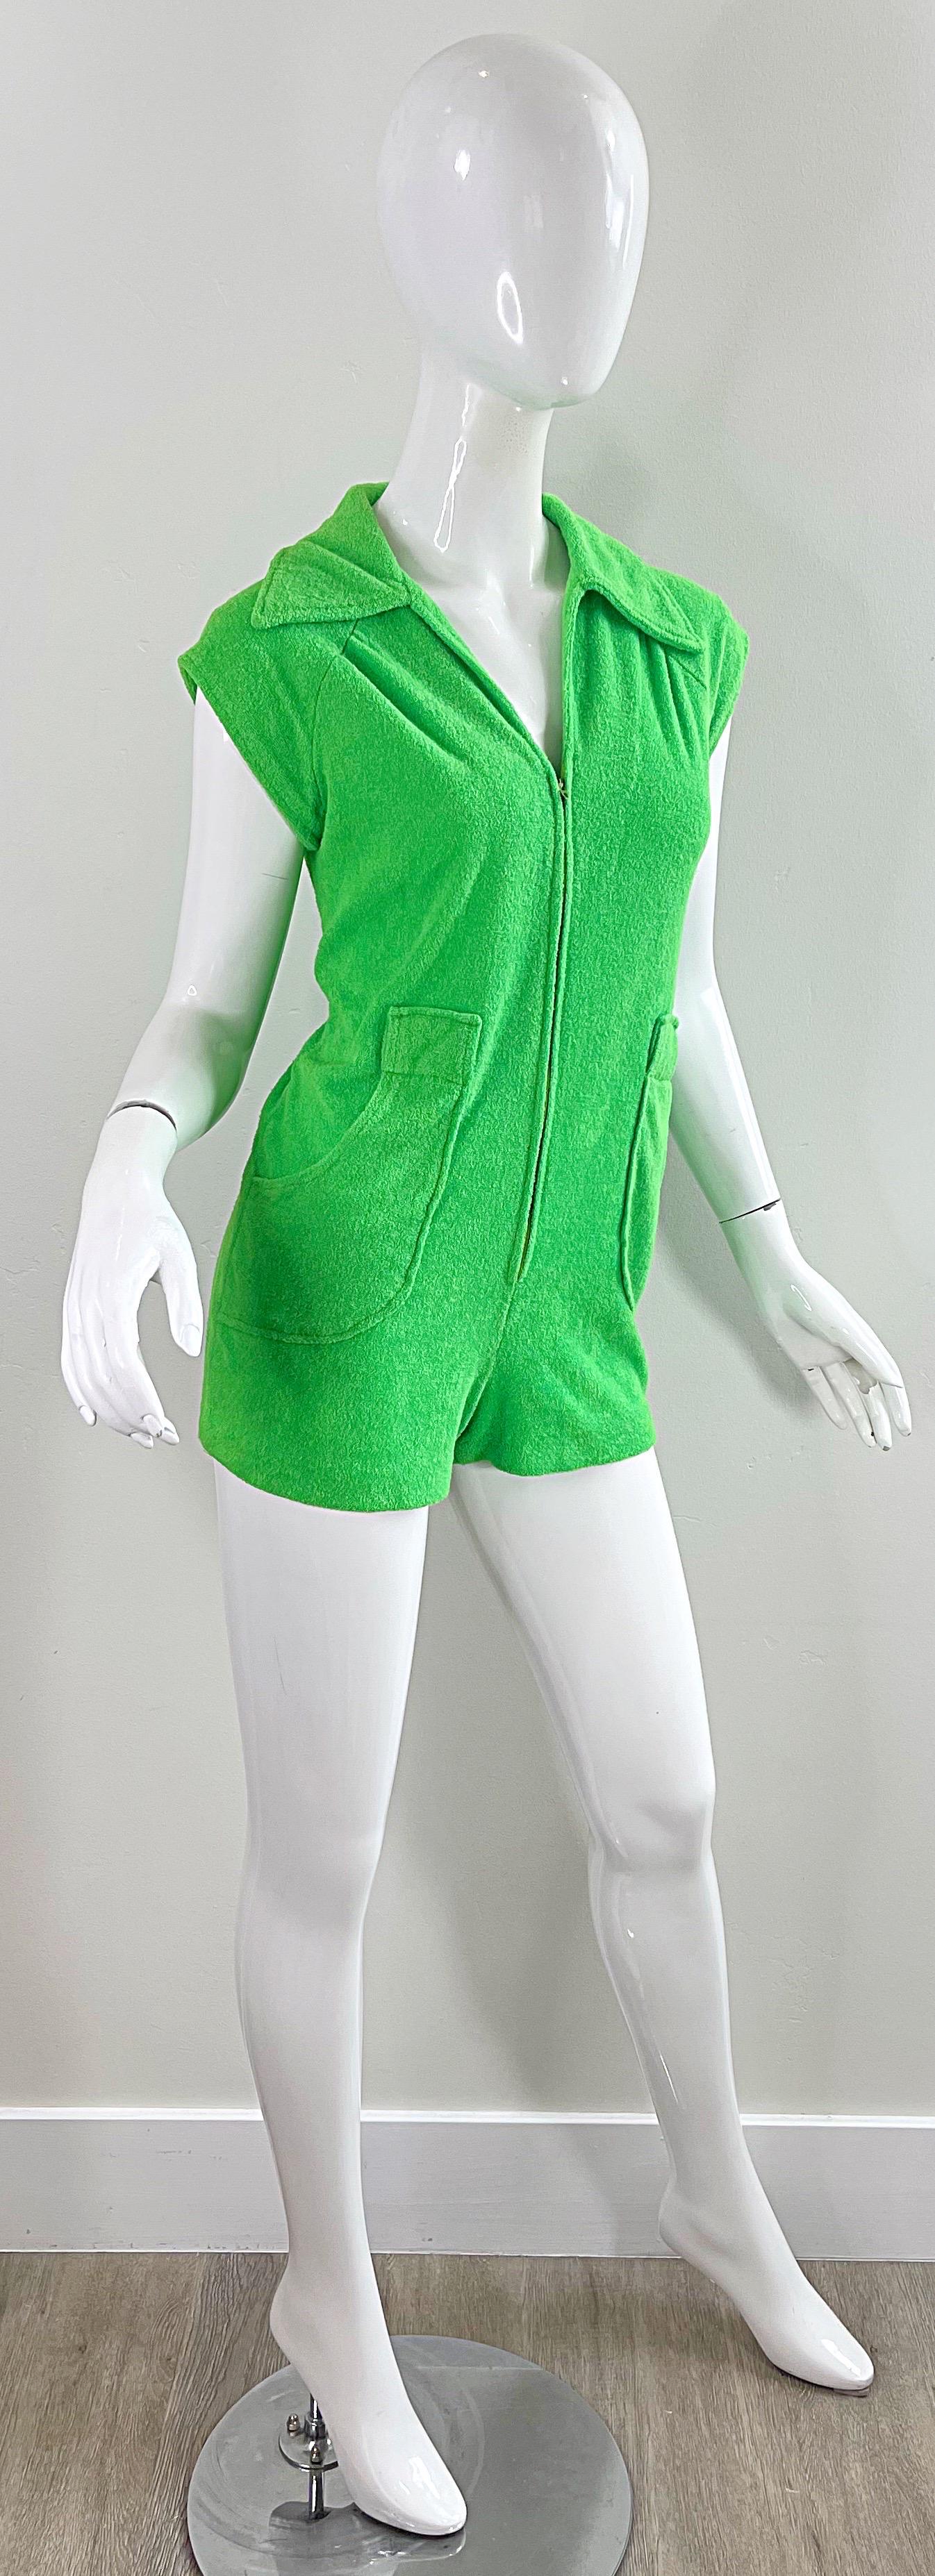 Amazing 1970s Terrycloth Neon Green Romper Vintage 70s Shorts Jumpsuit For Sale 5